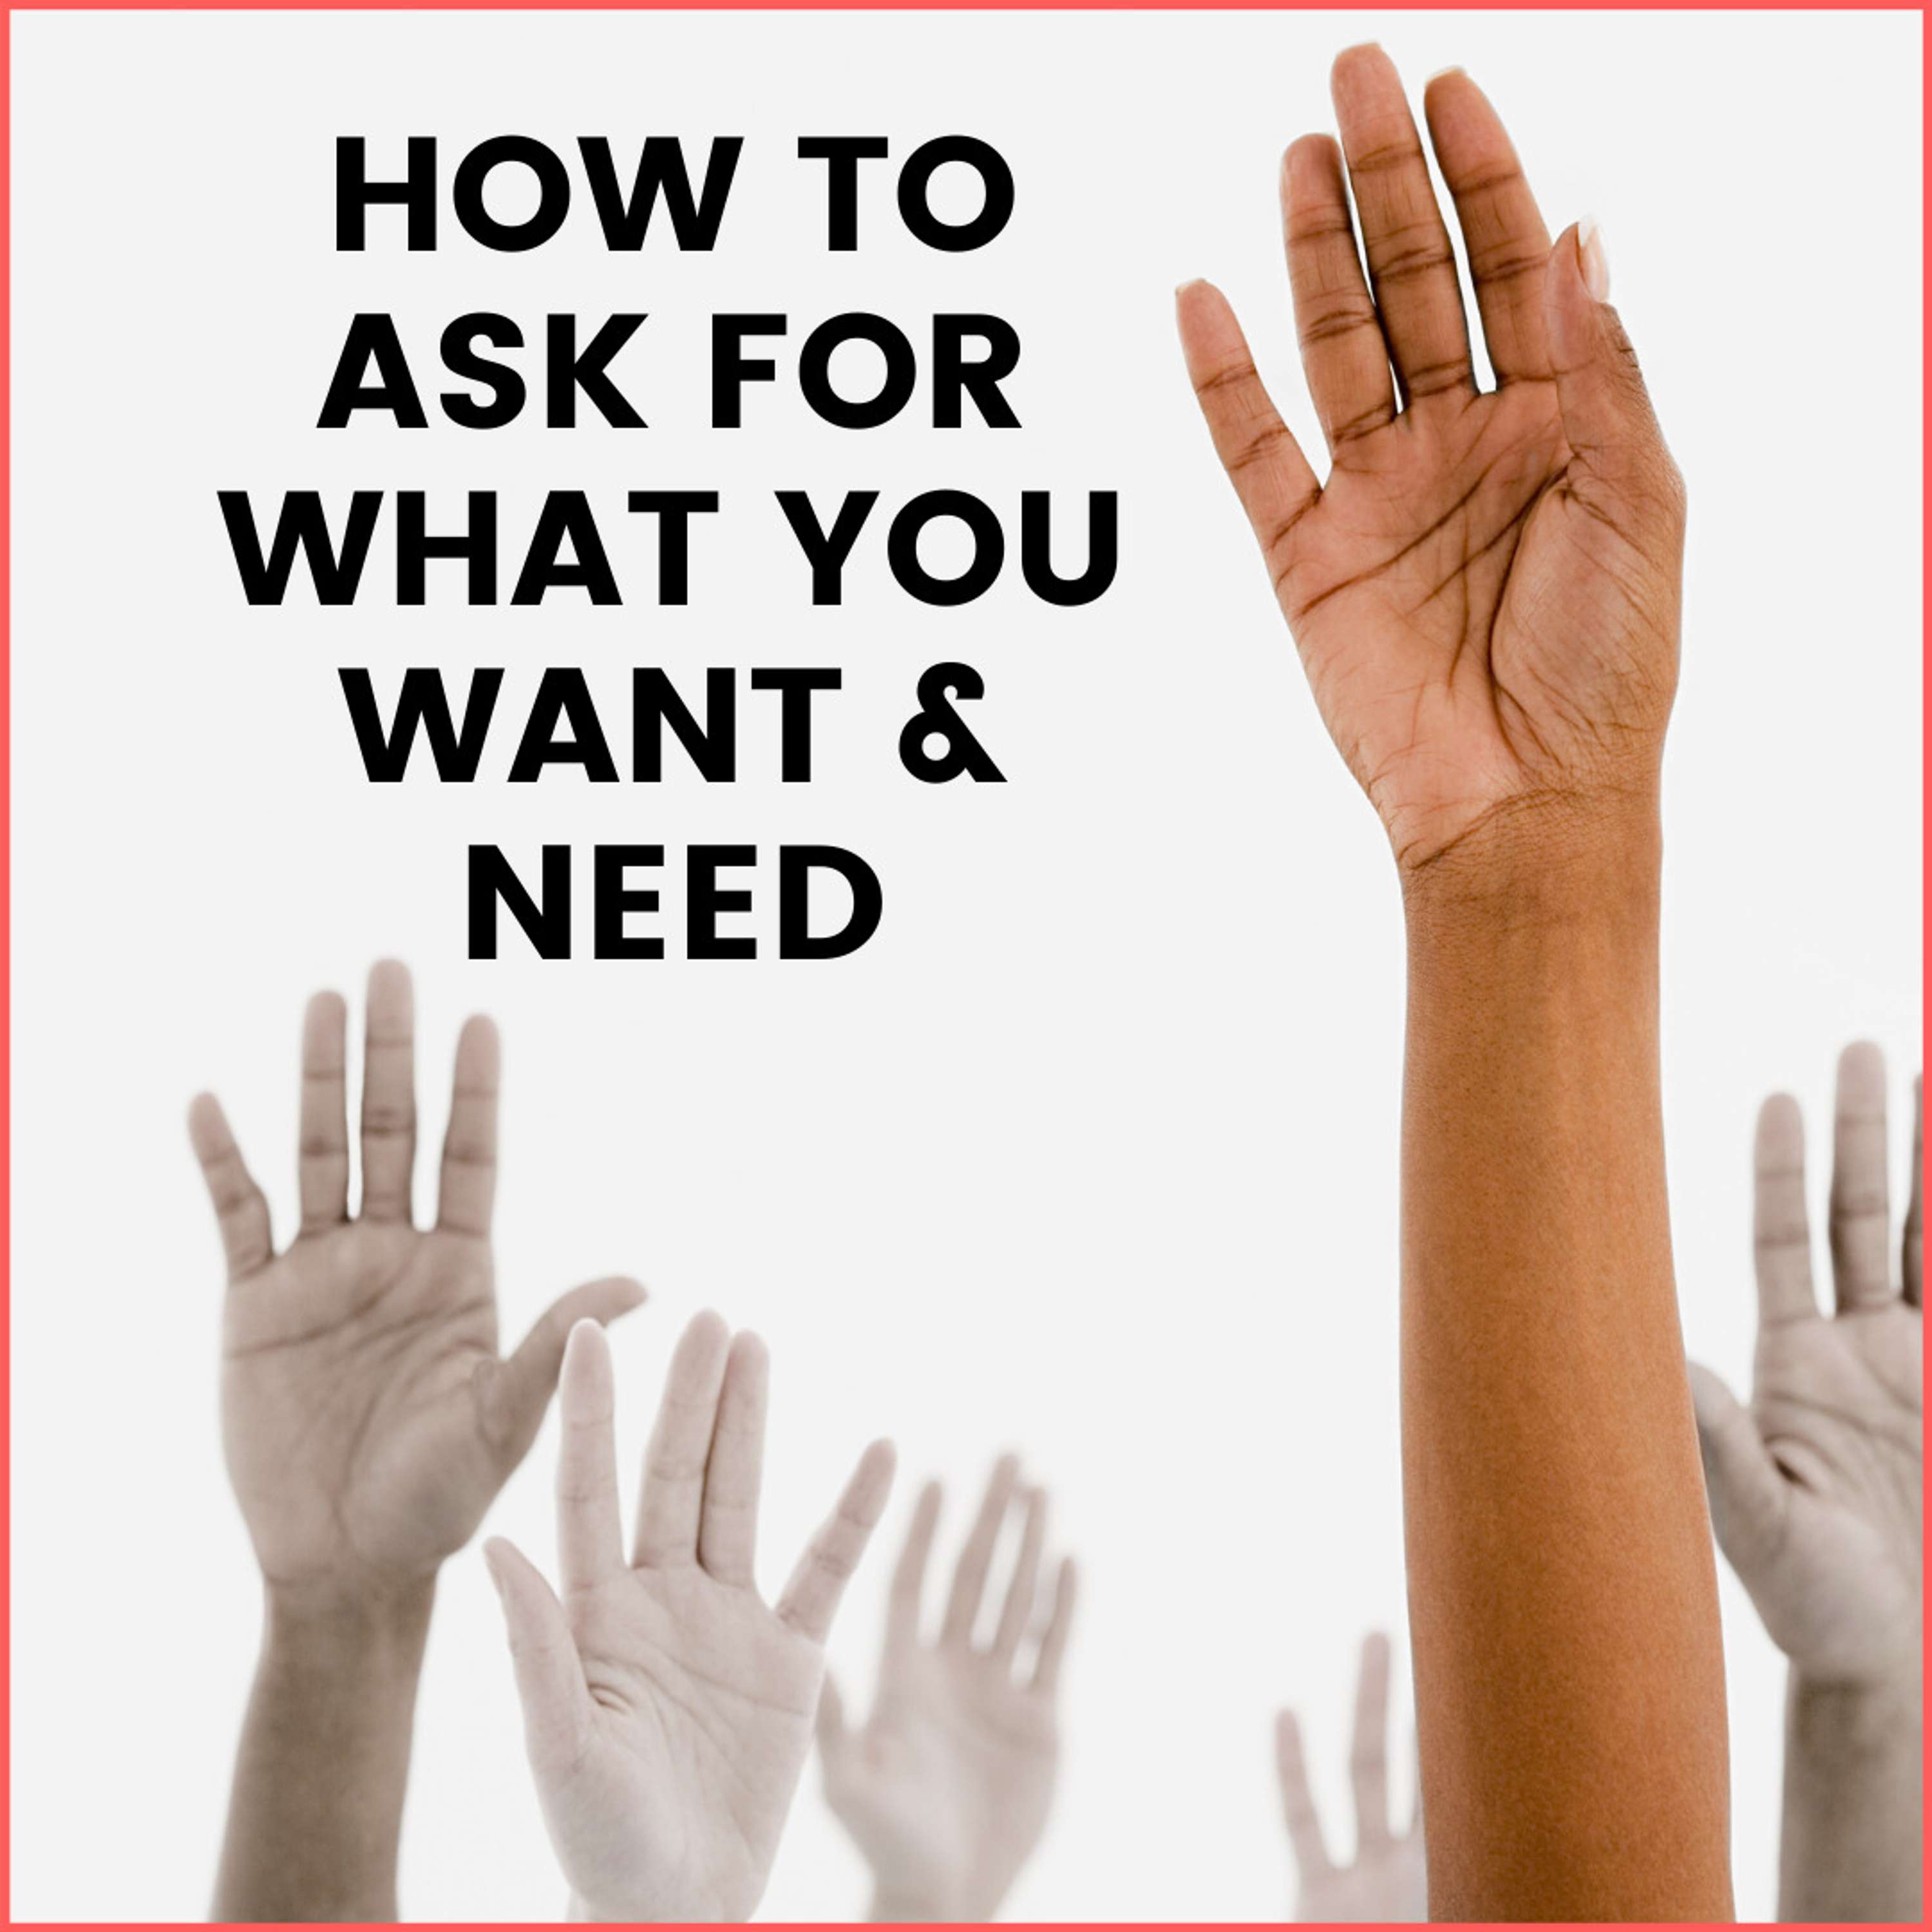 30. How to Ask for What You Want and Need